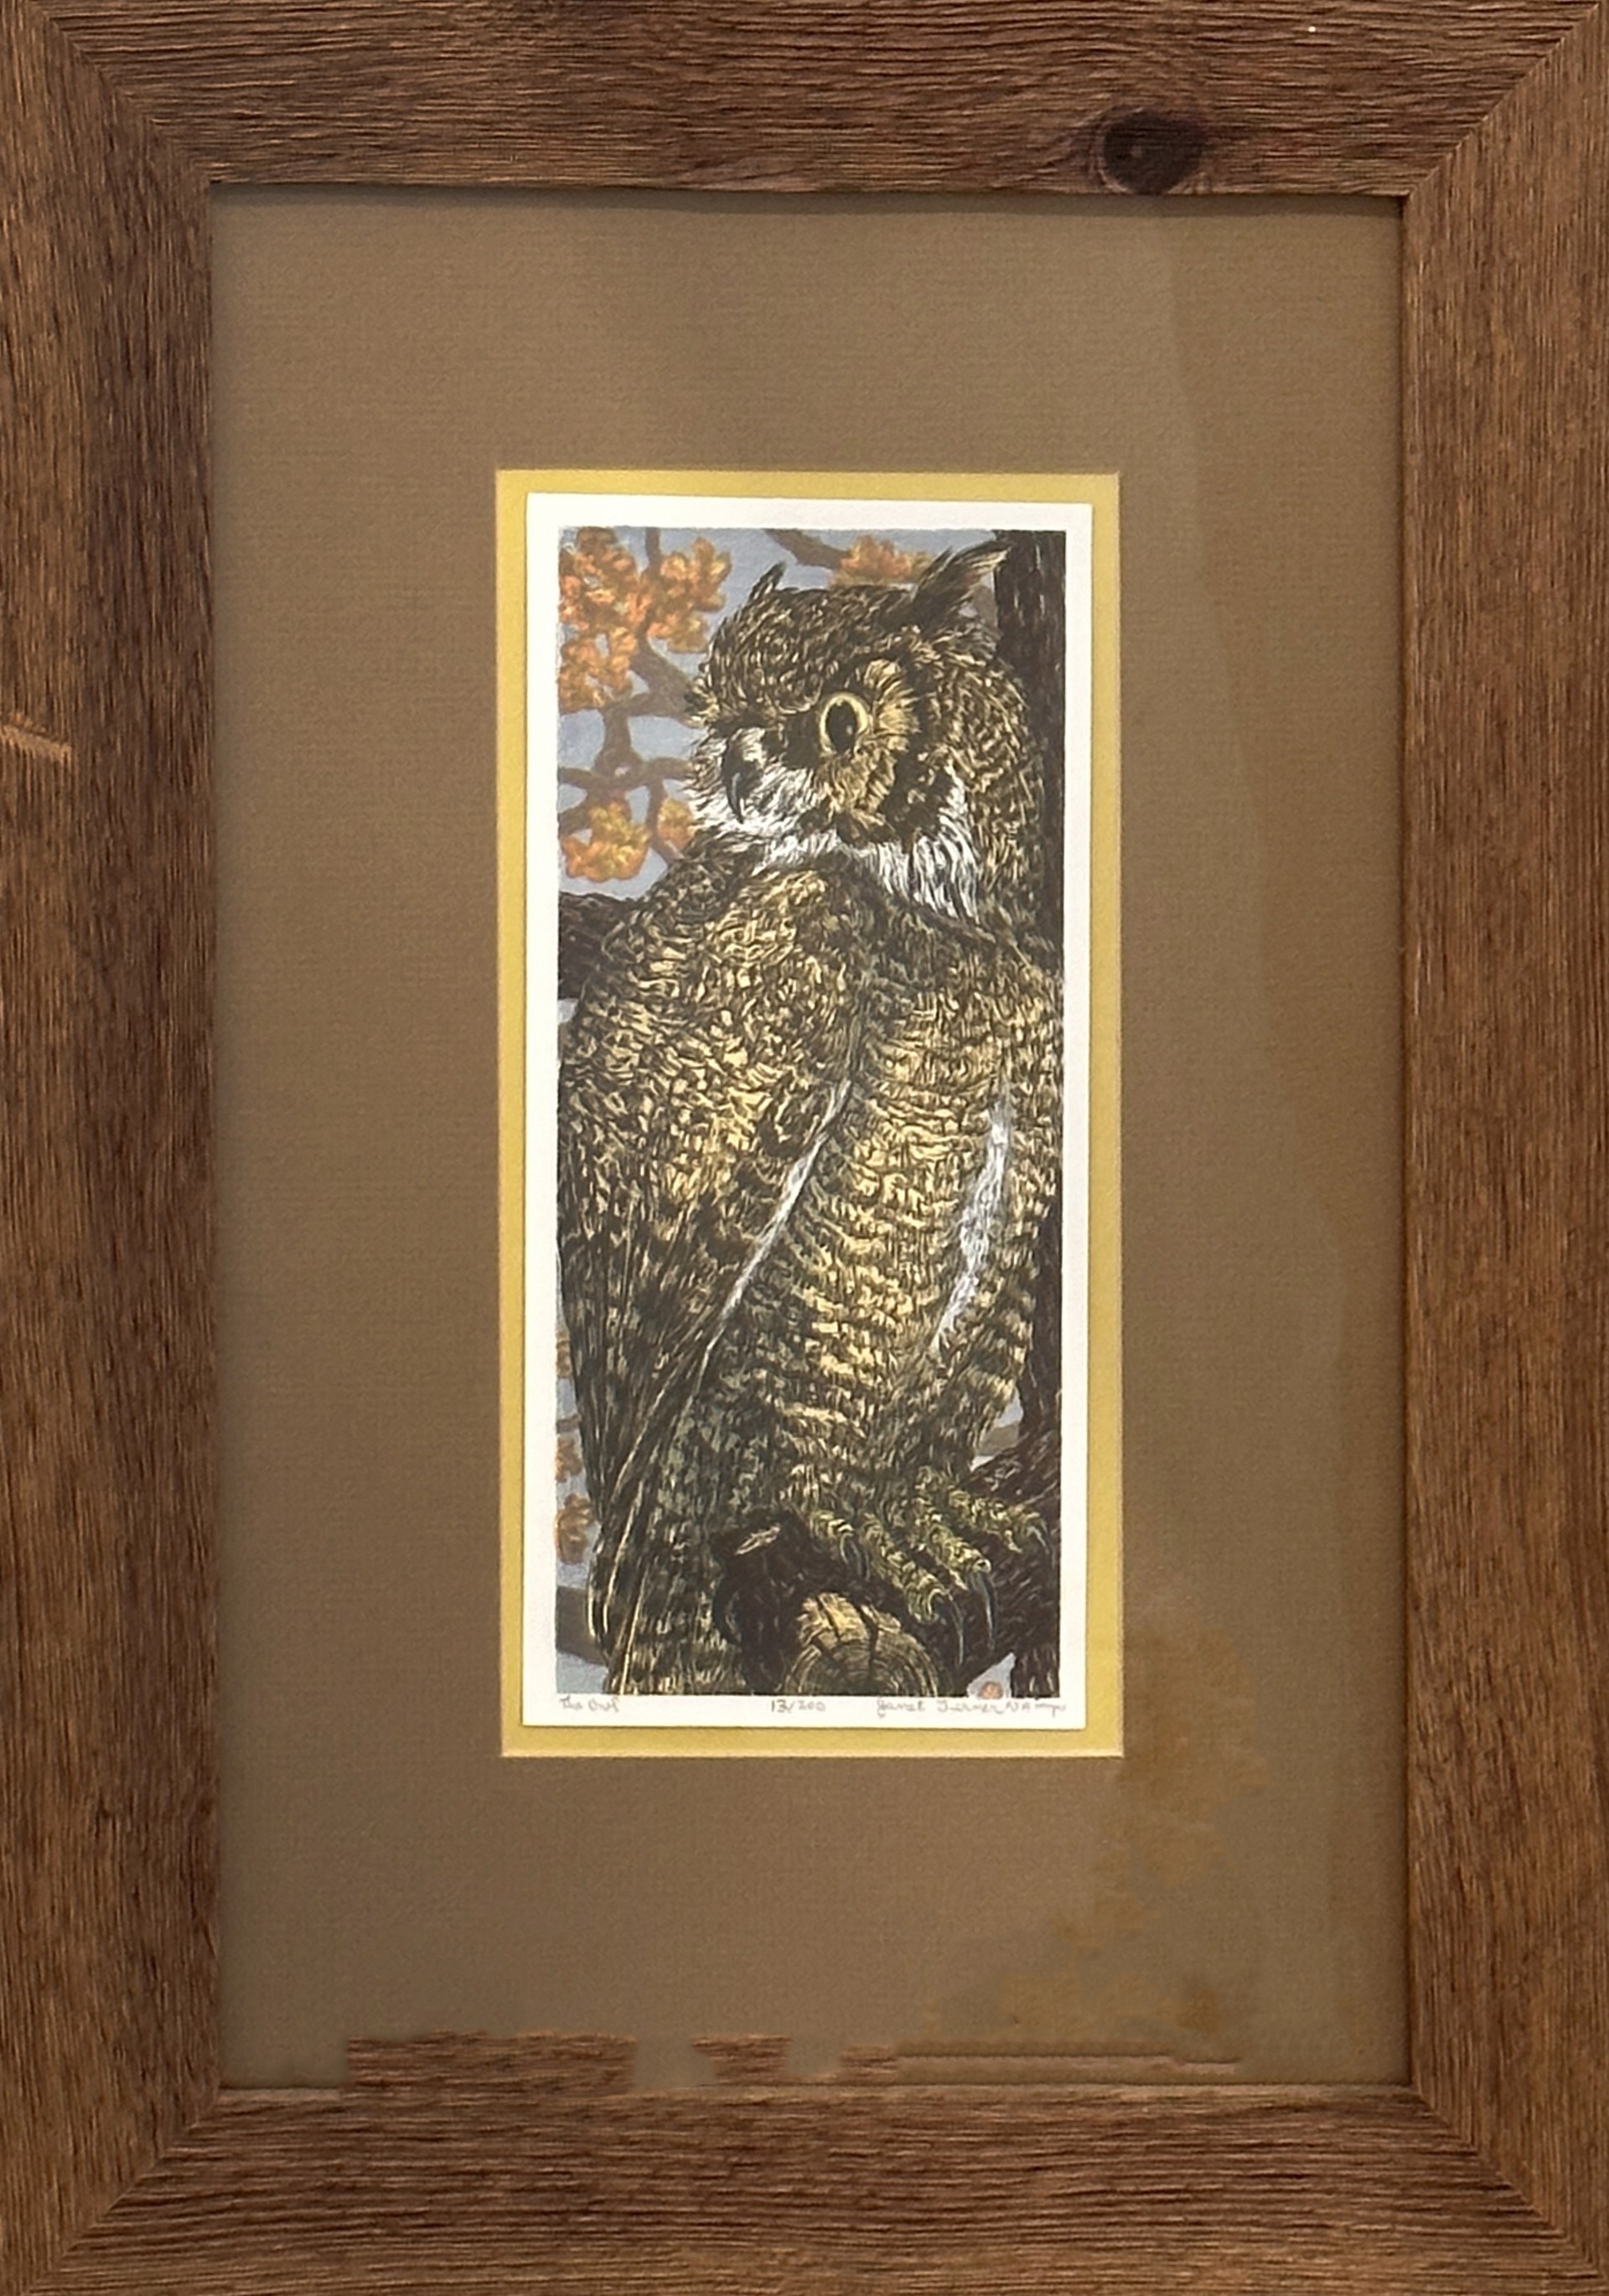 The Owl by Janet Turner